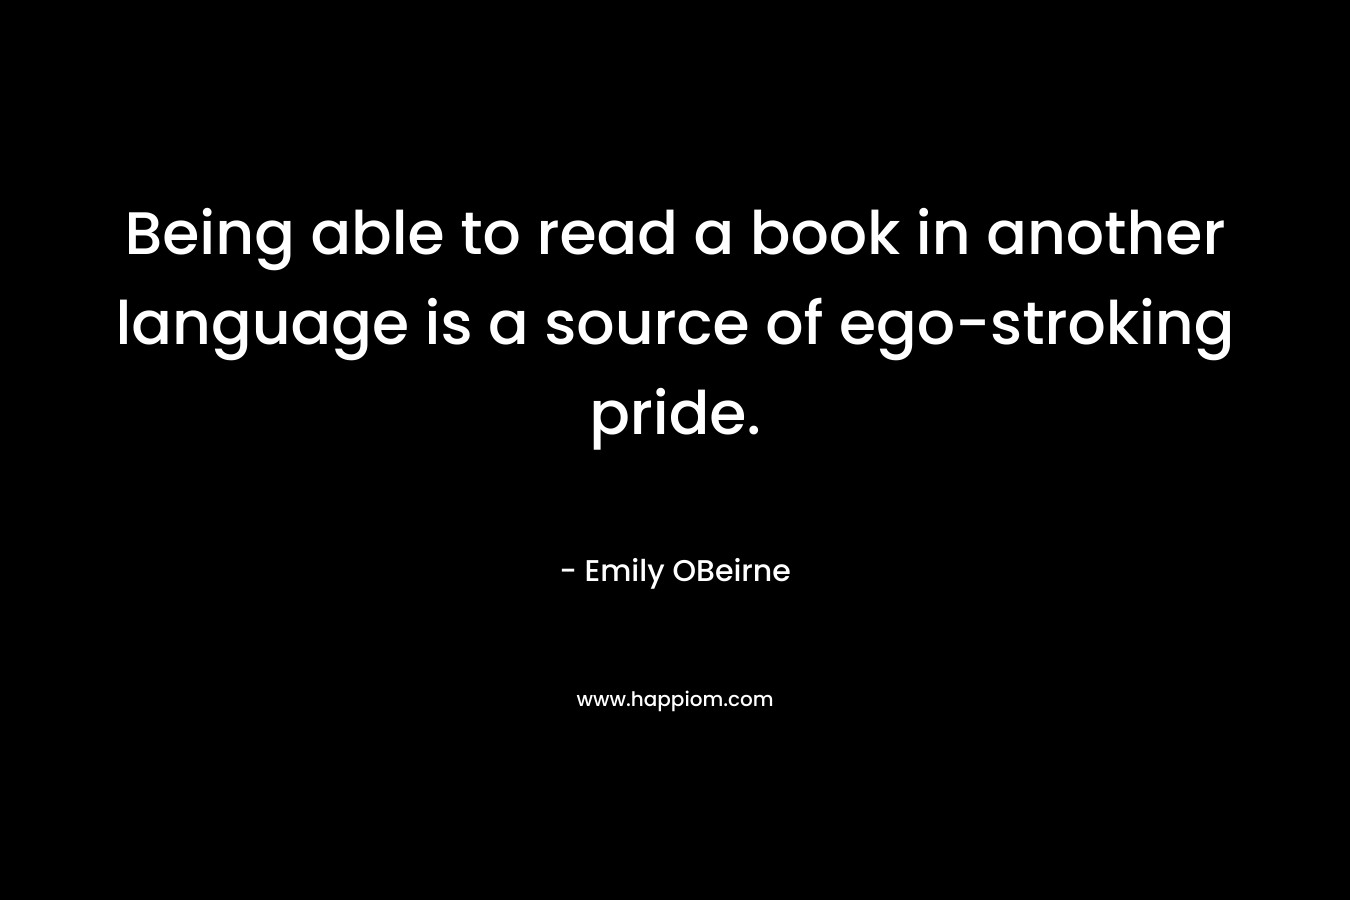 Being able to read a book in another language is a source of ego-stroking pride. – Emily OBeirne